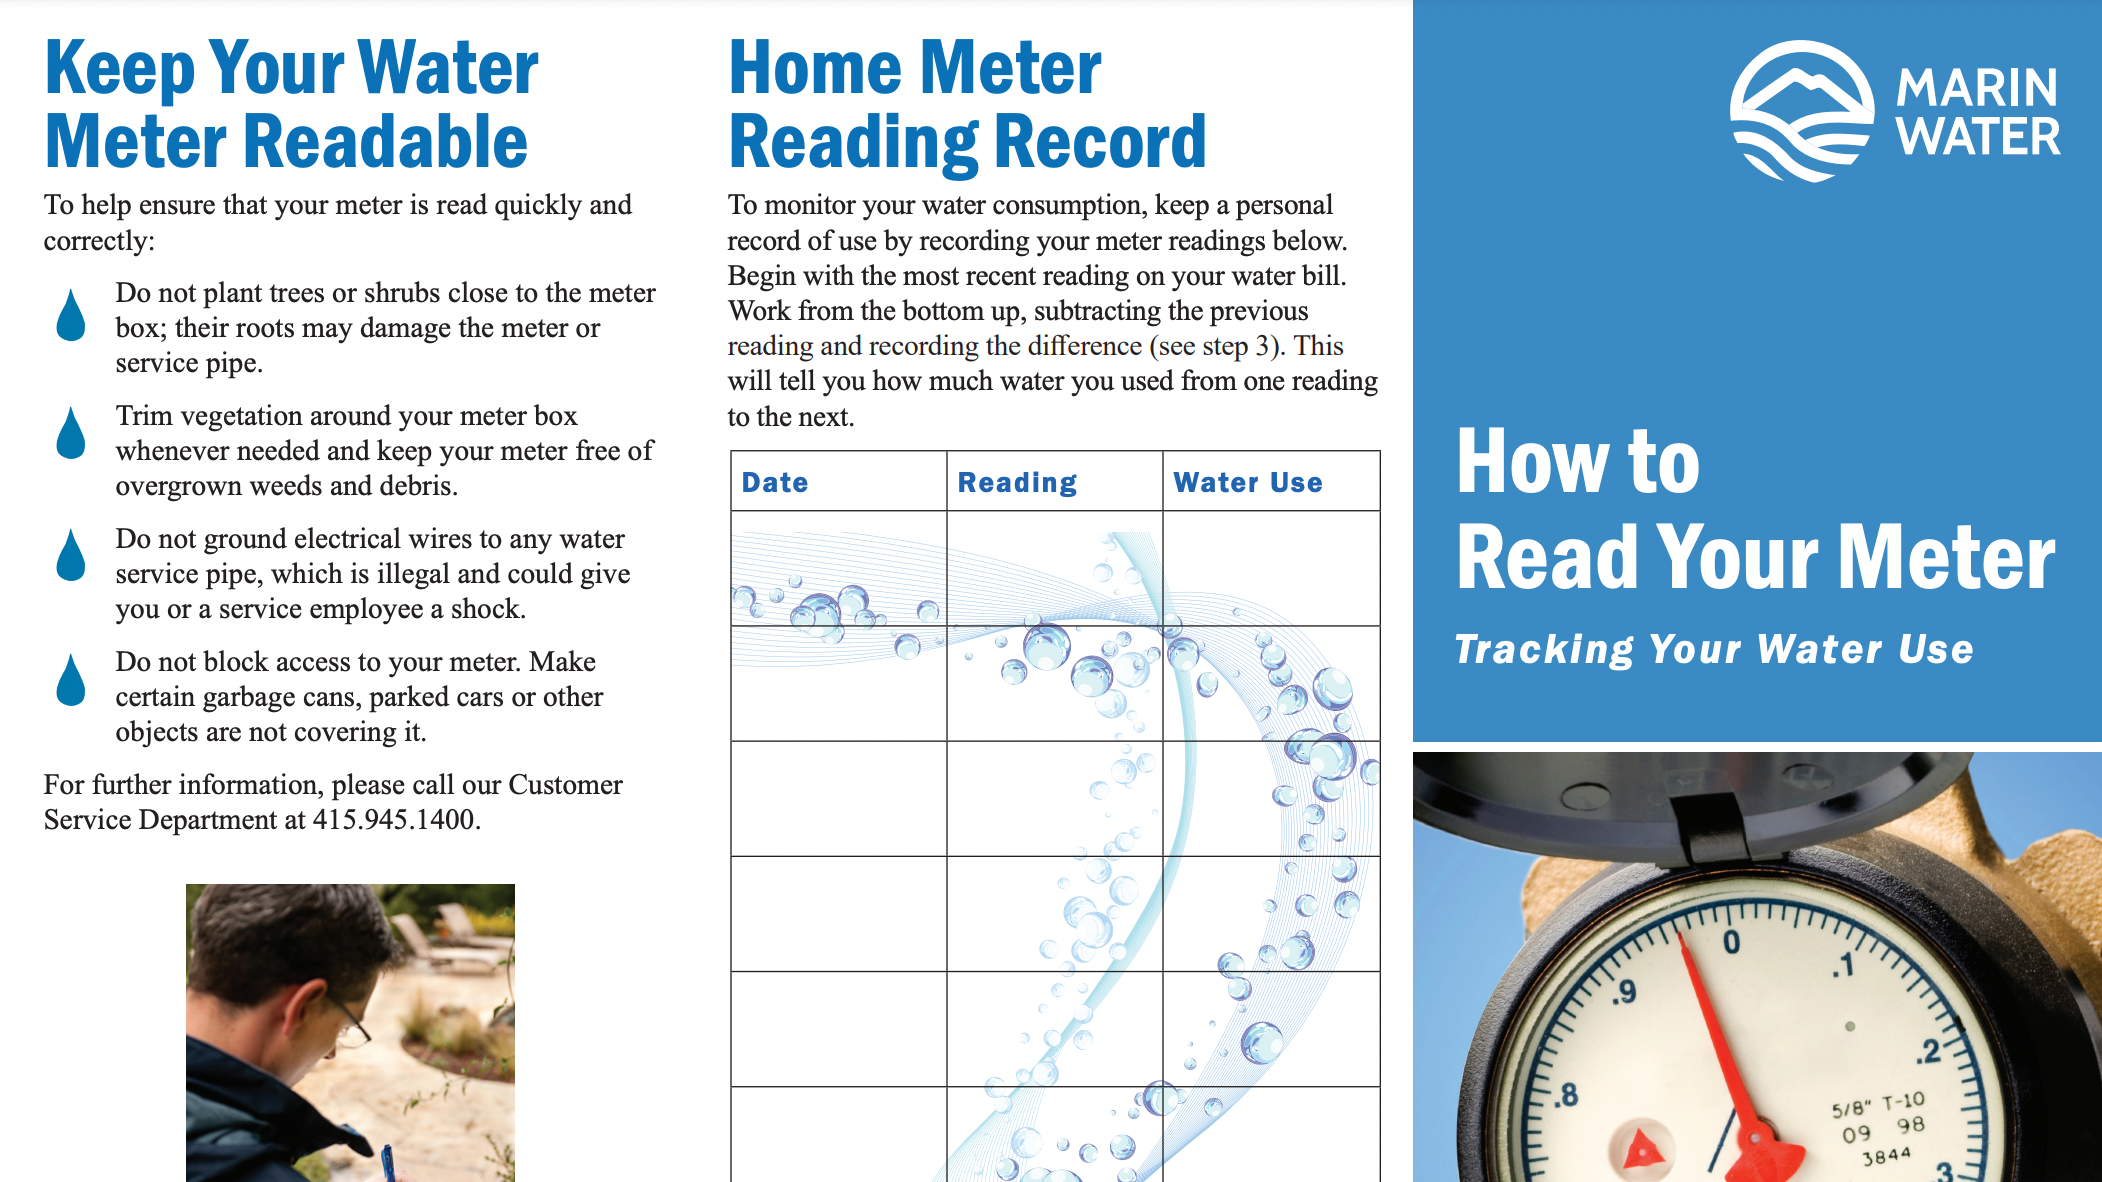 Thumbnail image of How to Read Your Meter brochure